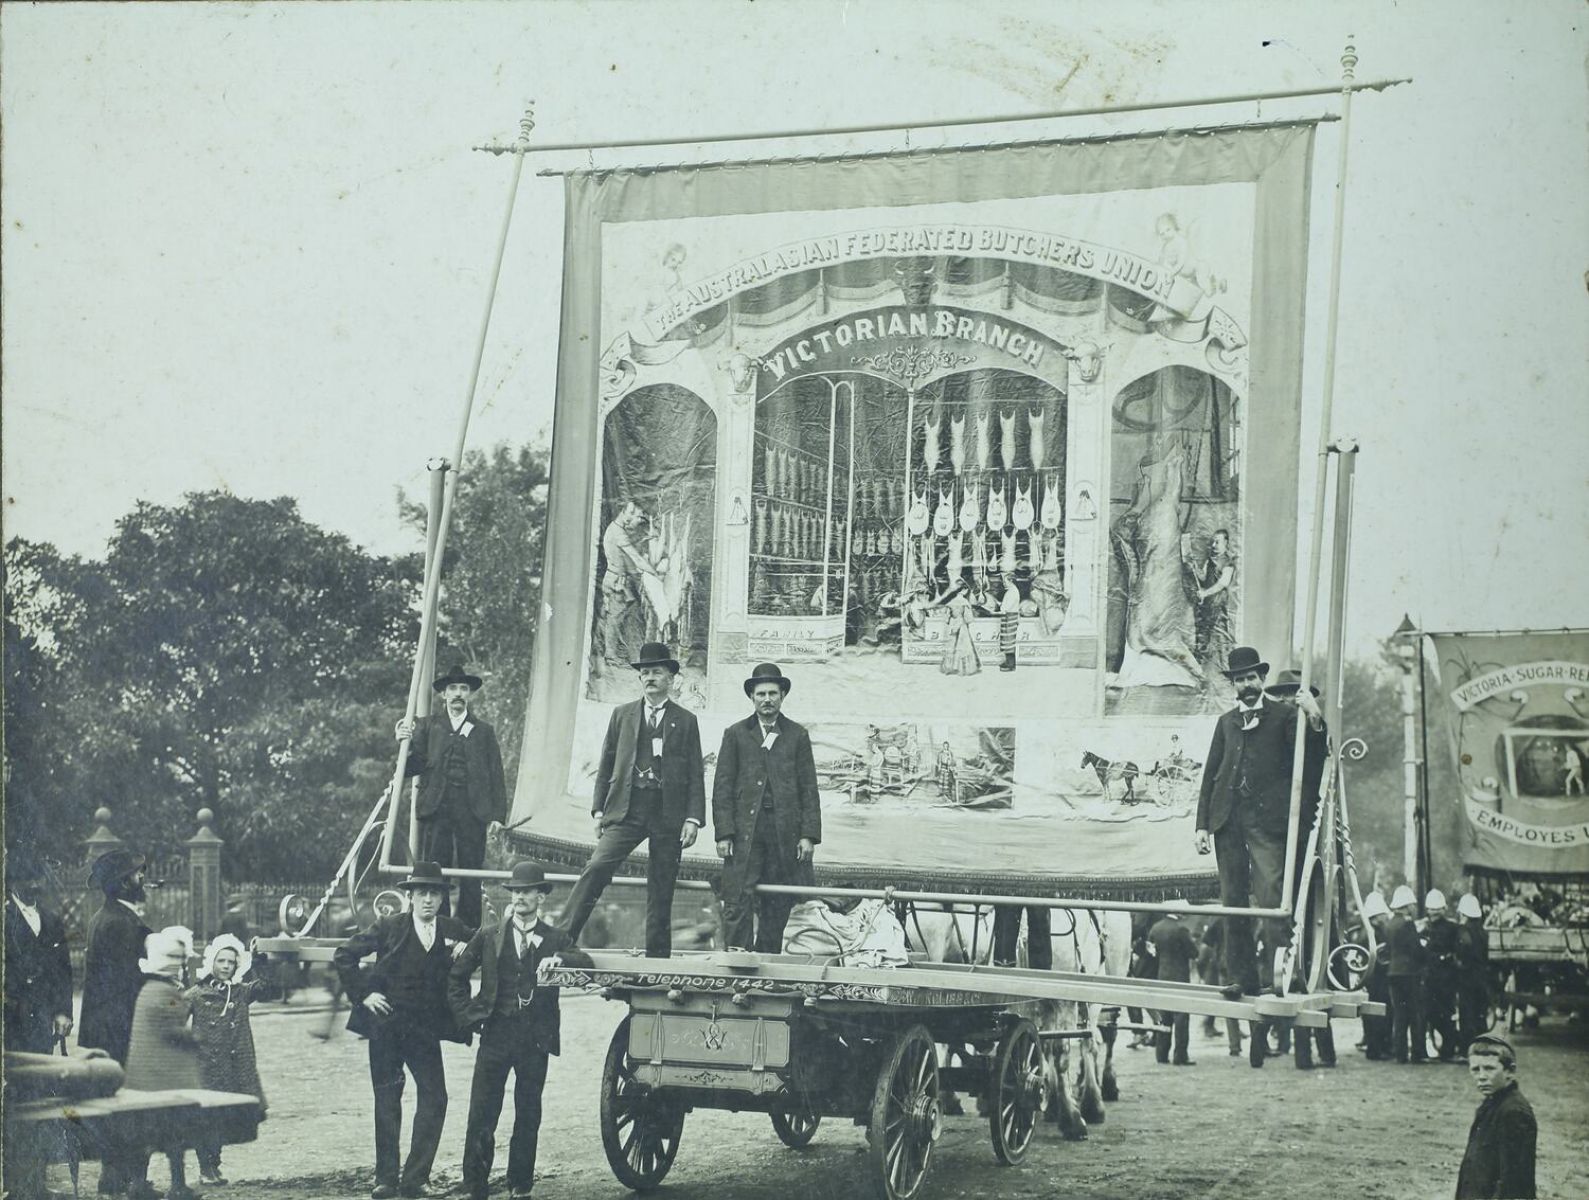 A black and white photo of large square banner on a cart with men standing at the base